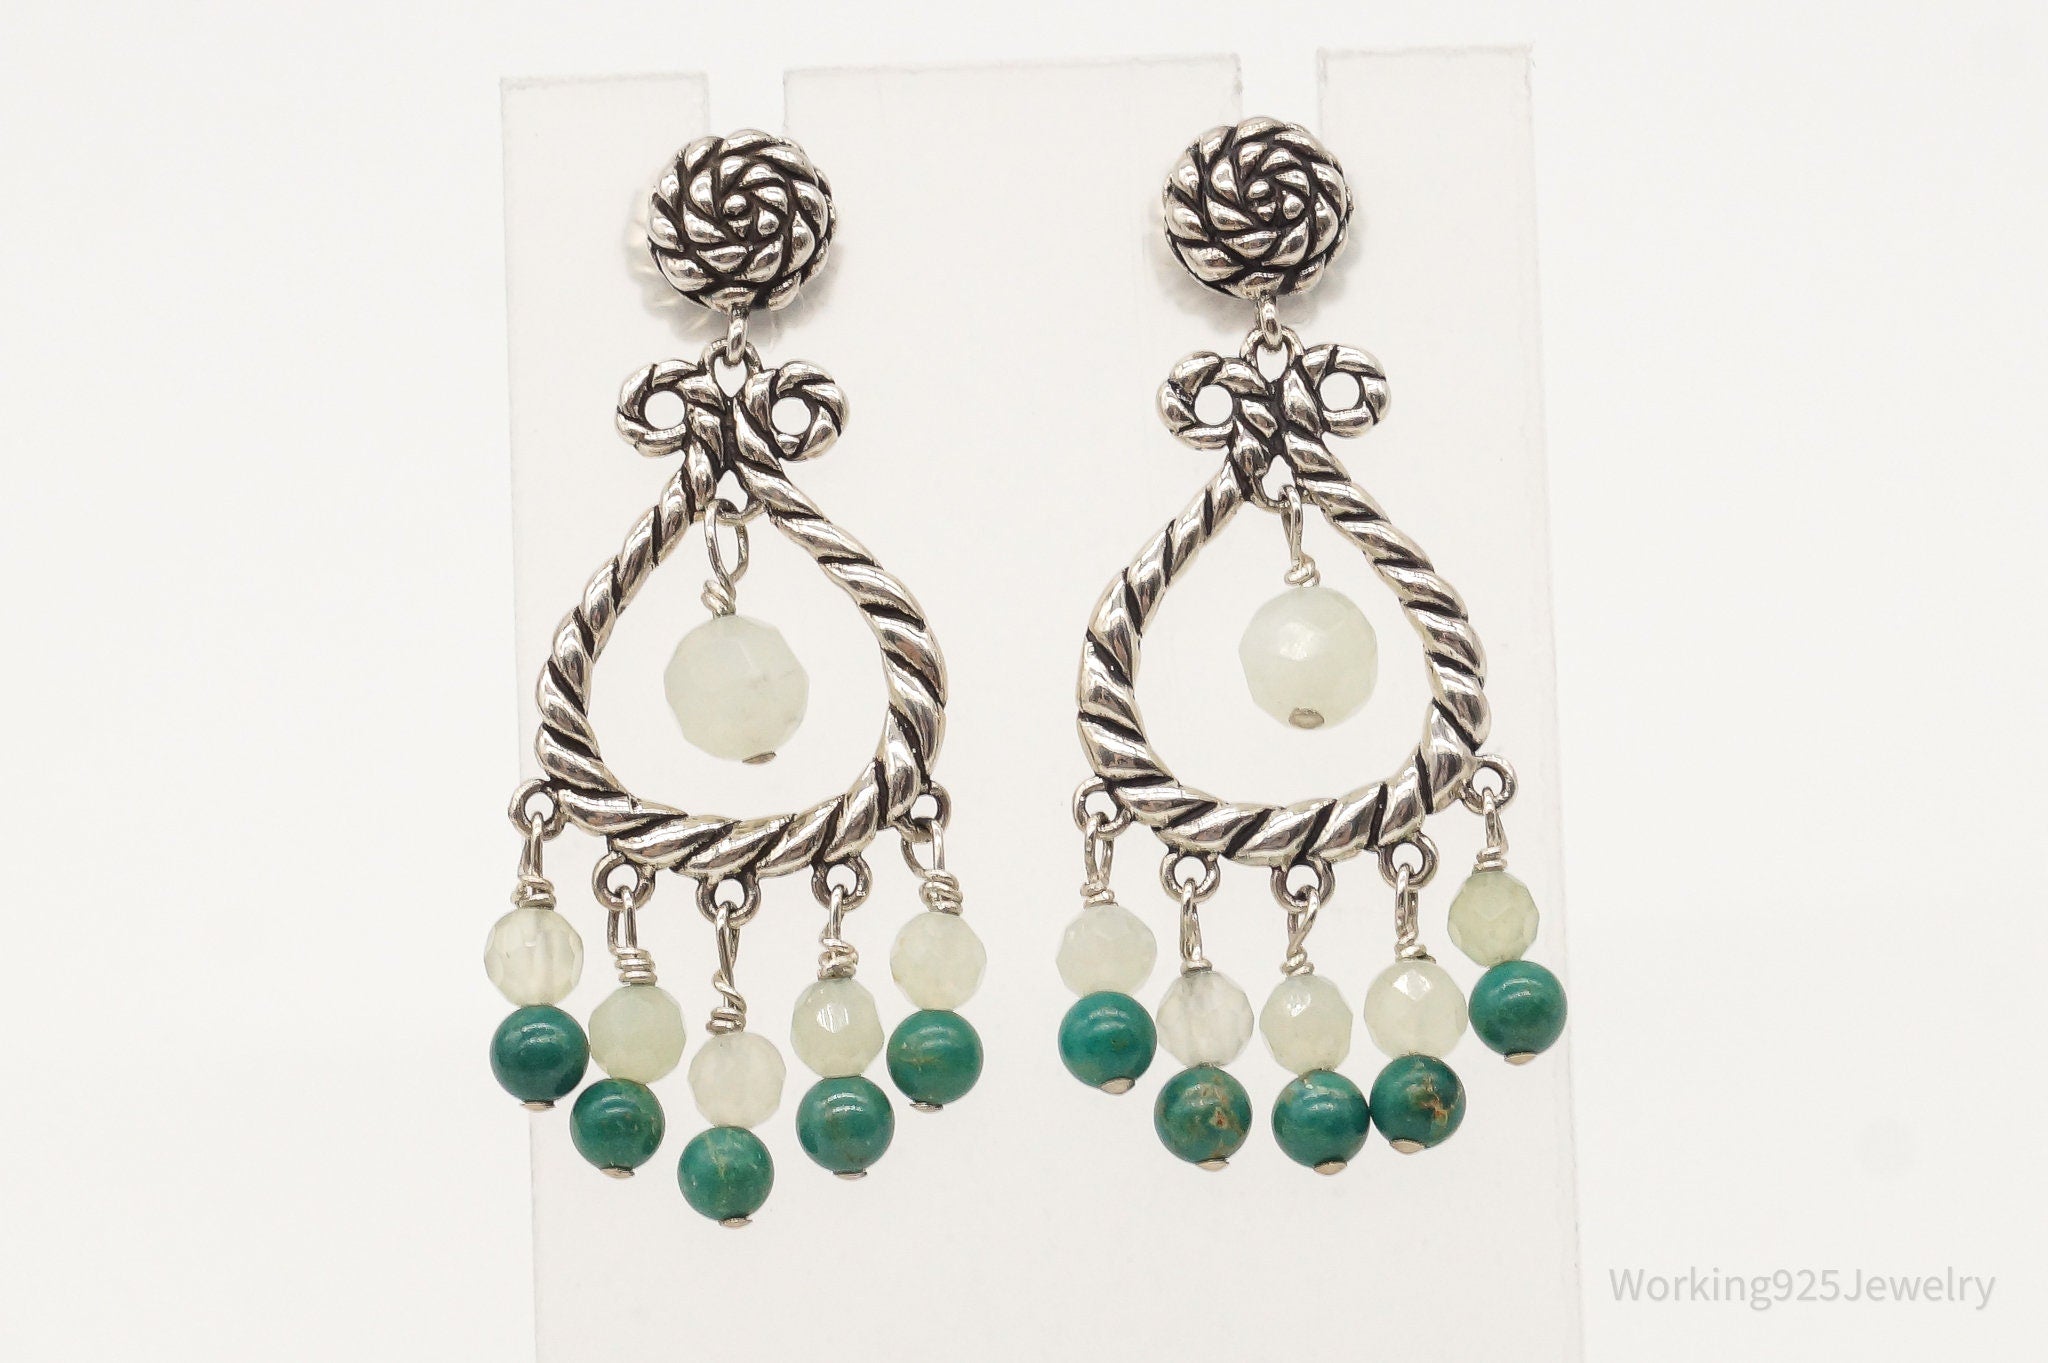 Western Carolyn Pollack Relios Green Quartz Turquoise Sterling Silver Earrings